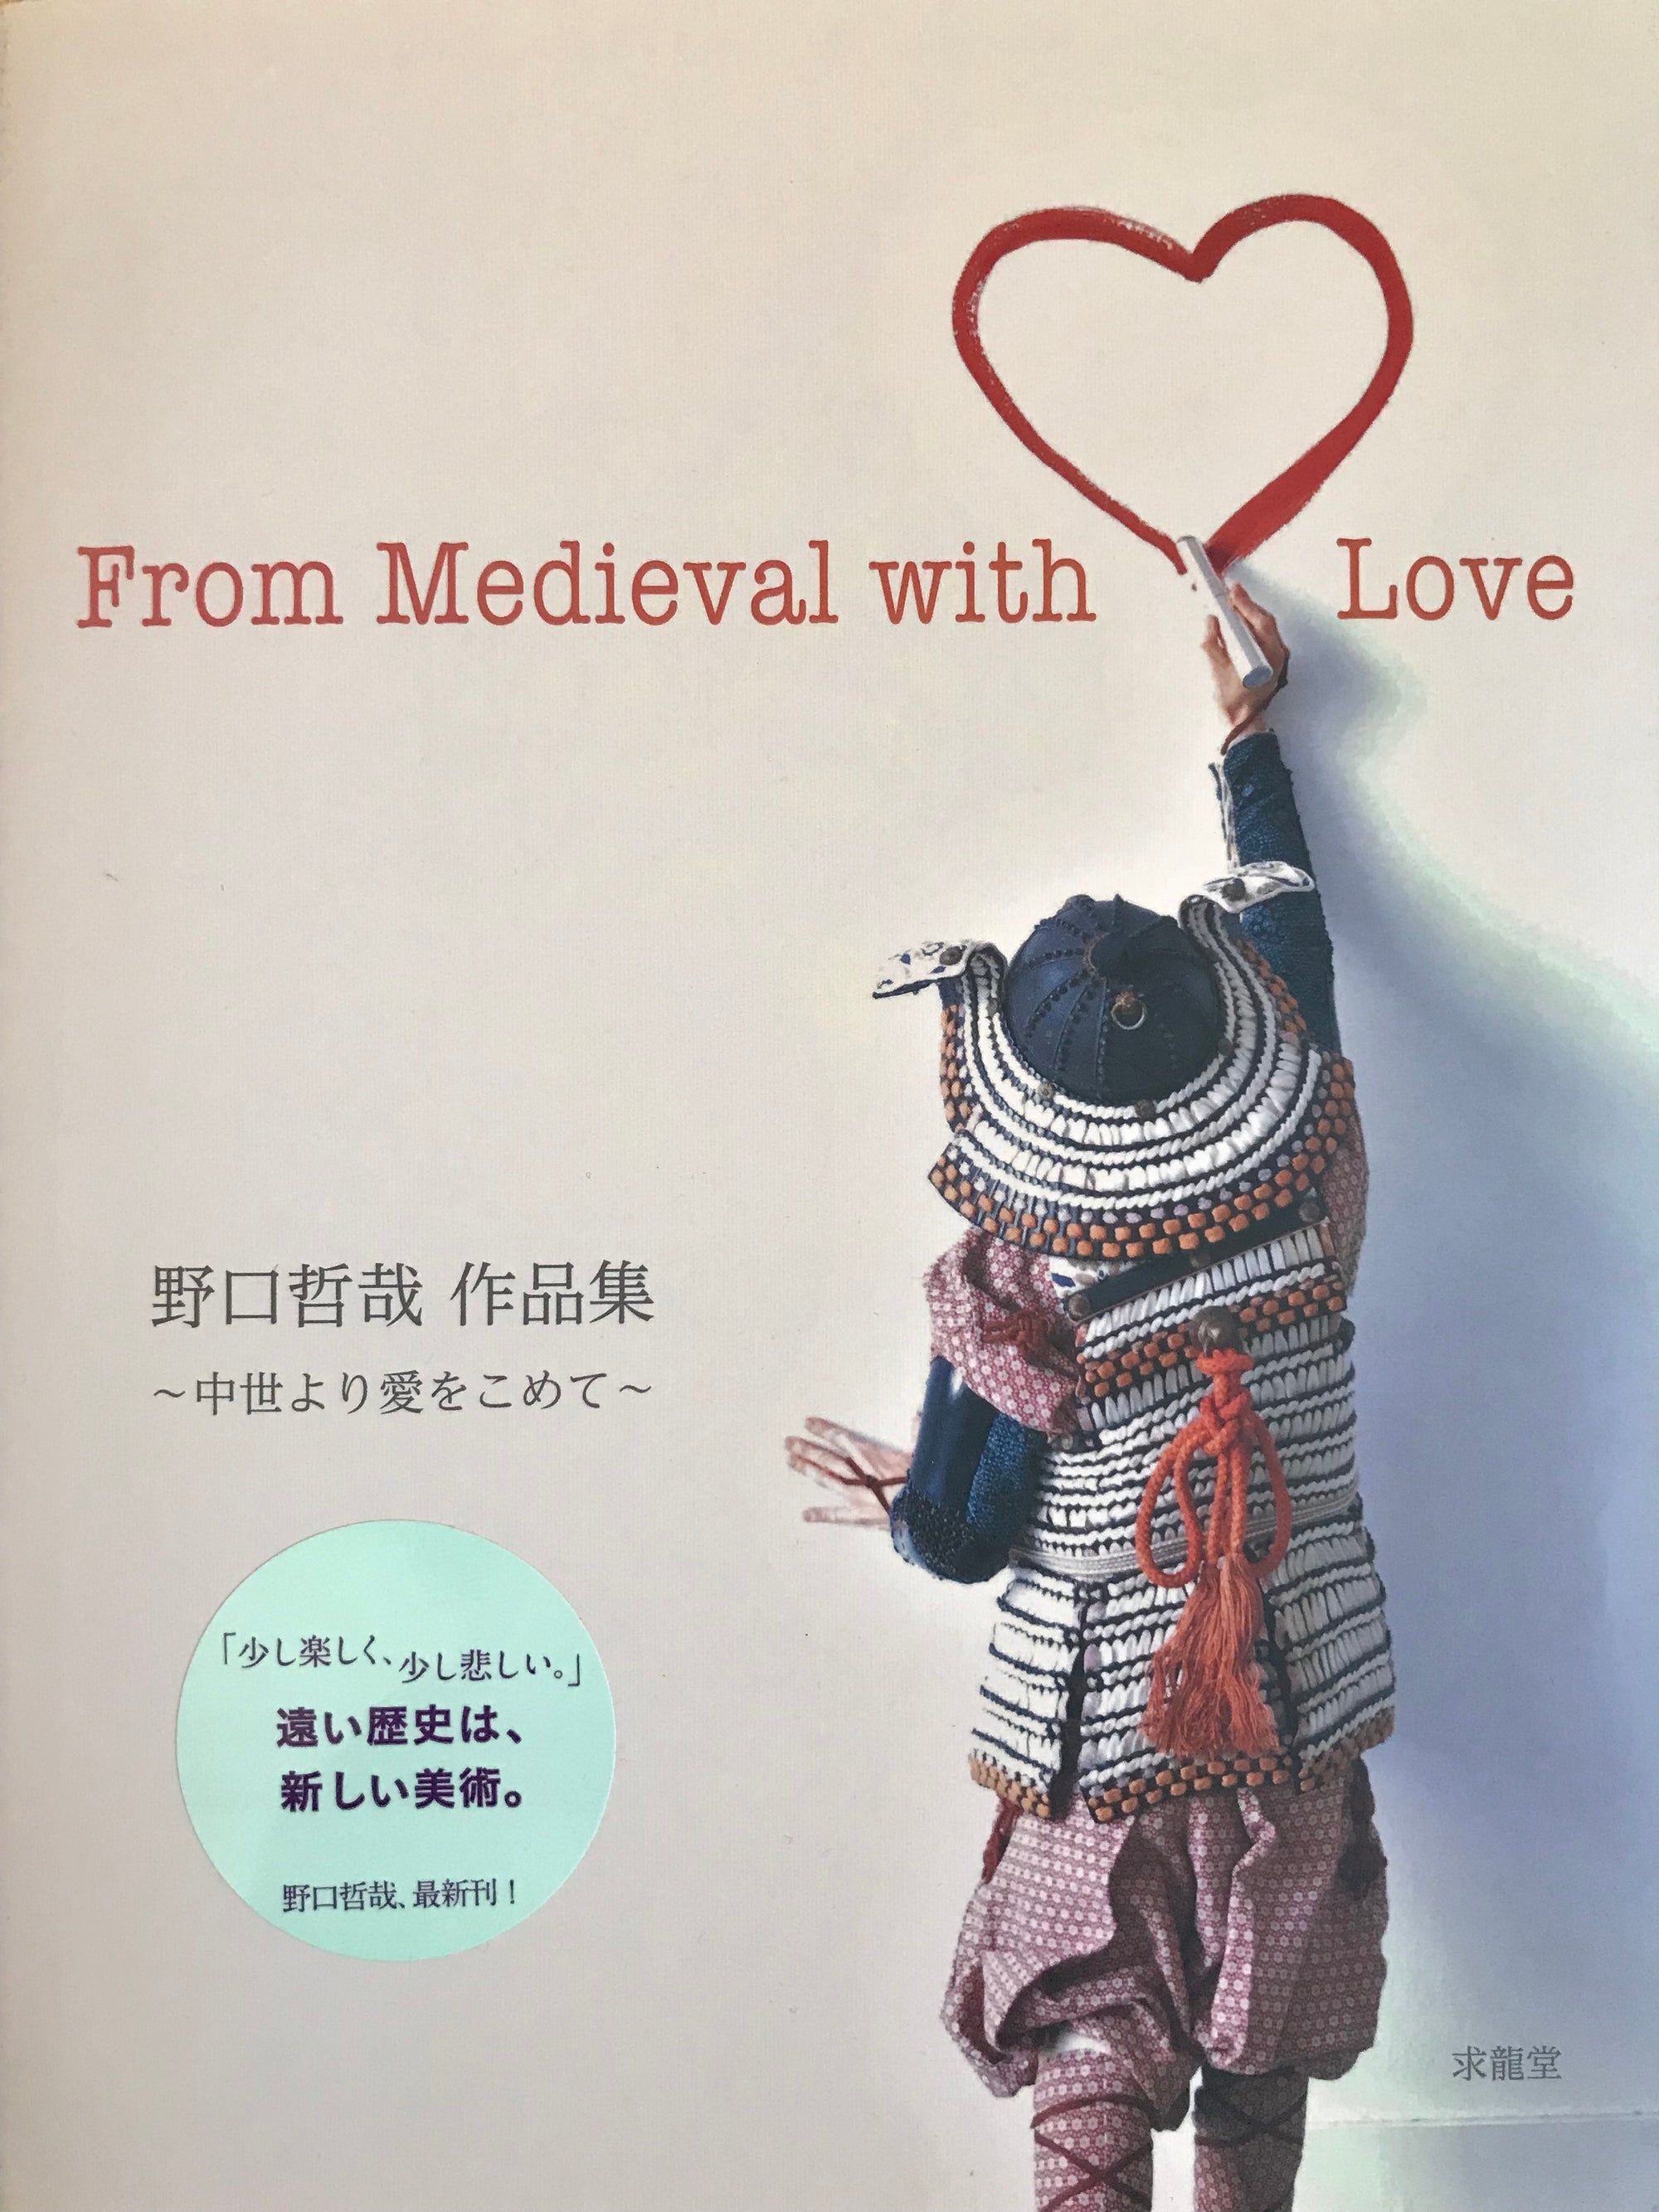 Tetsuya Noguchi Collection “From Medieval with Love”